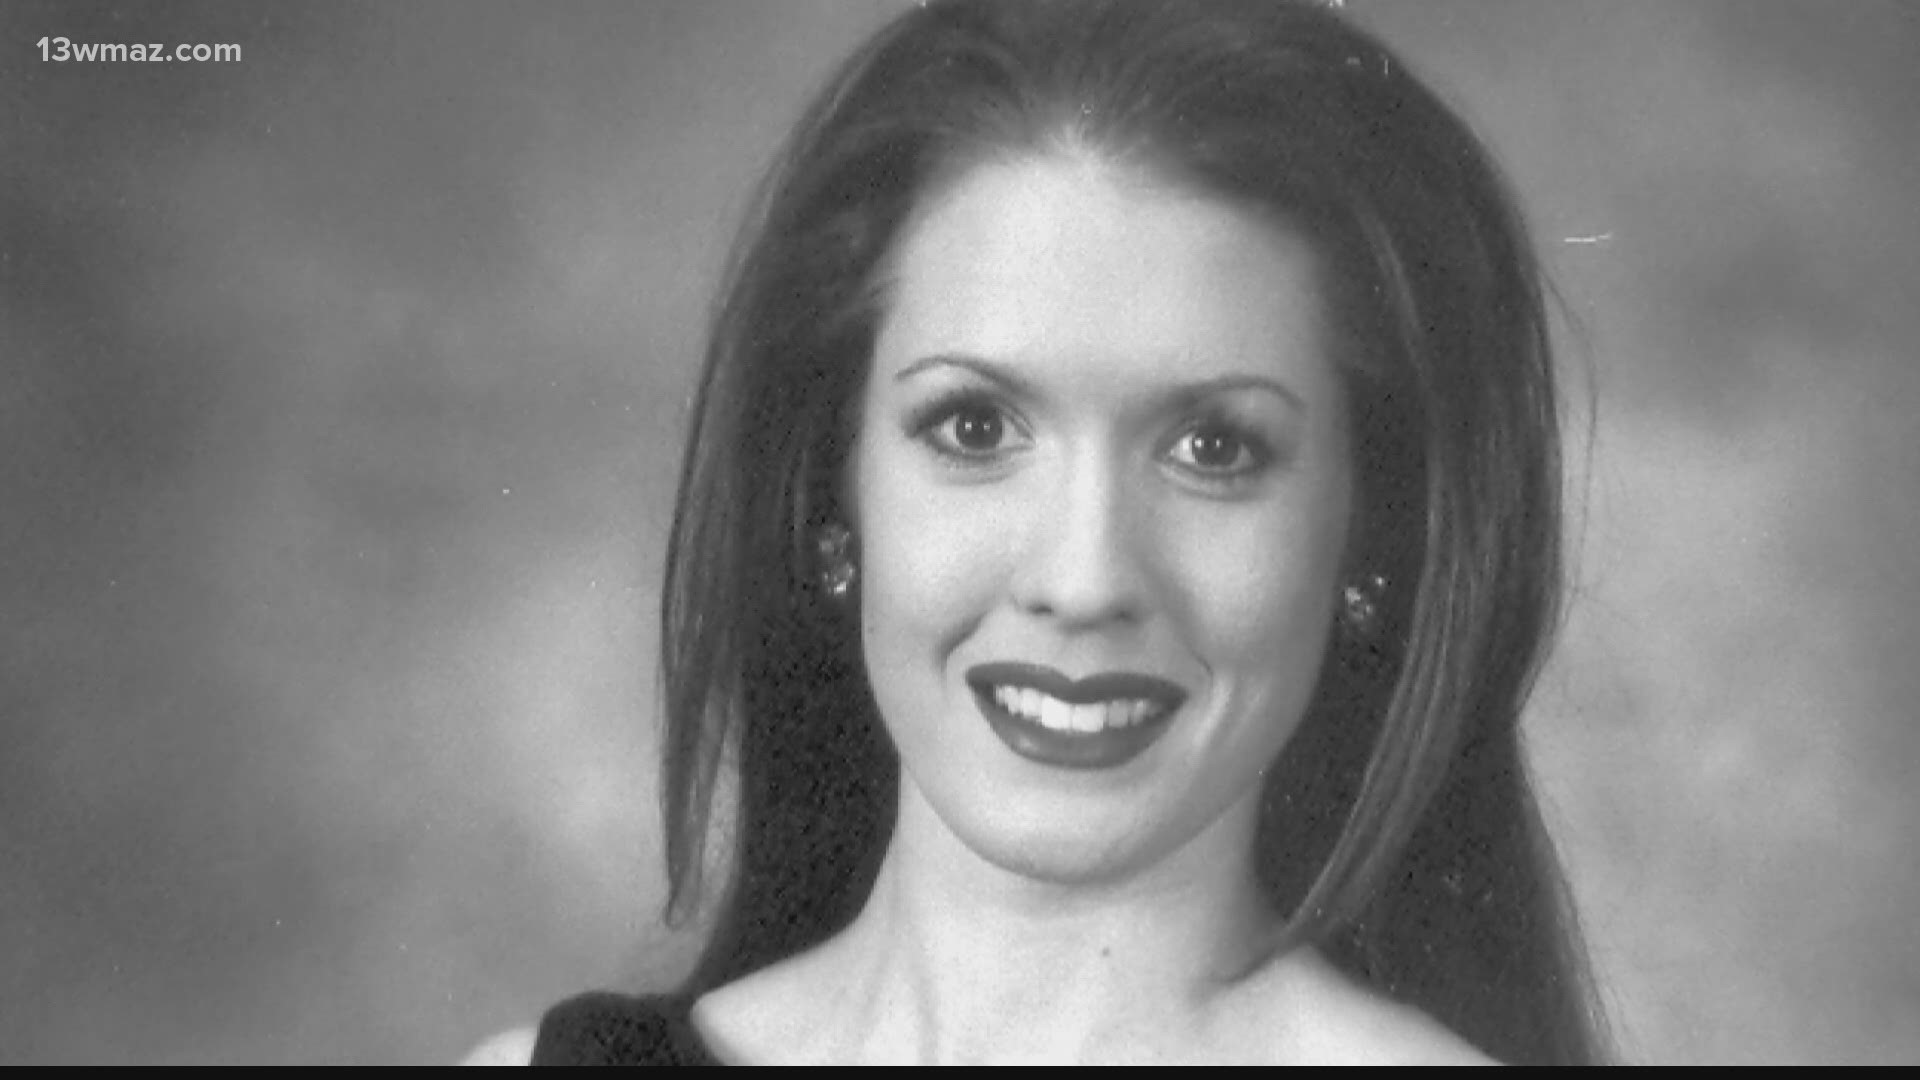 15 years ago today, Ocilla teacher and local beauty queen Tara Grinstead was first reported missing. Now, friends say they are still waiting for justice in her death